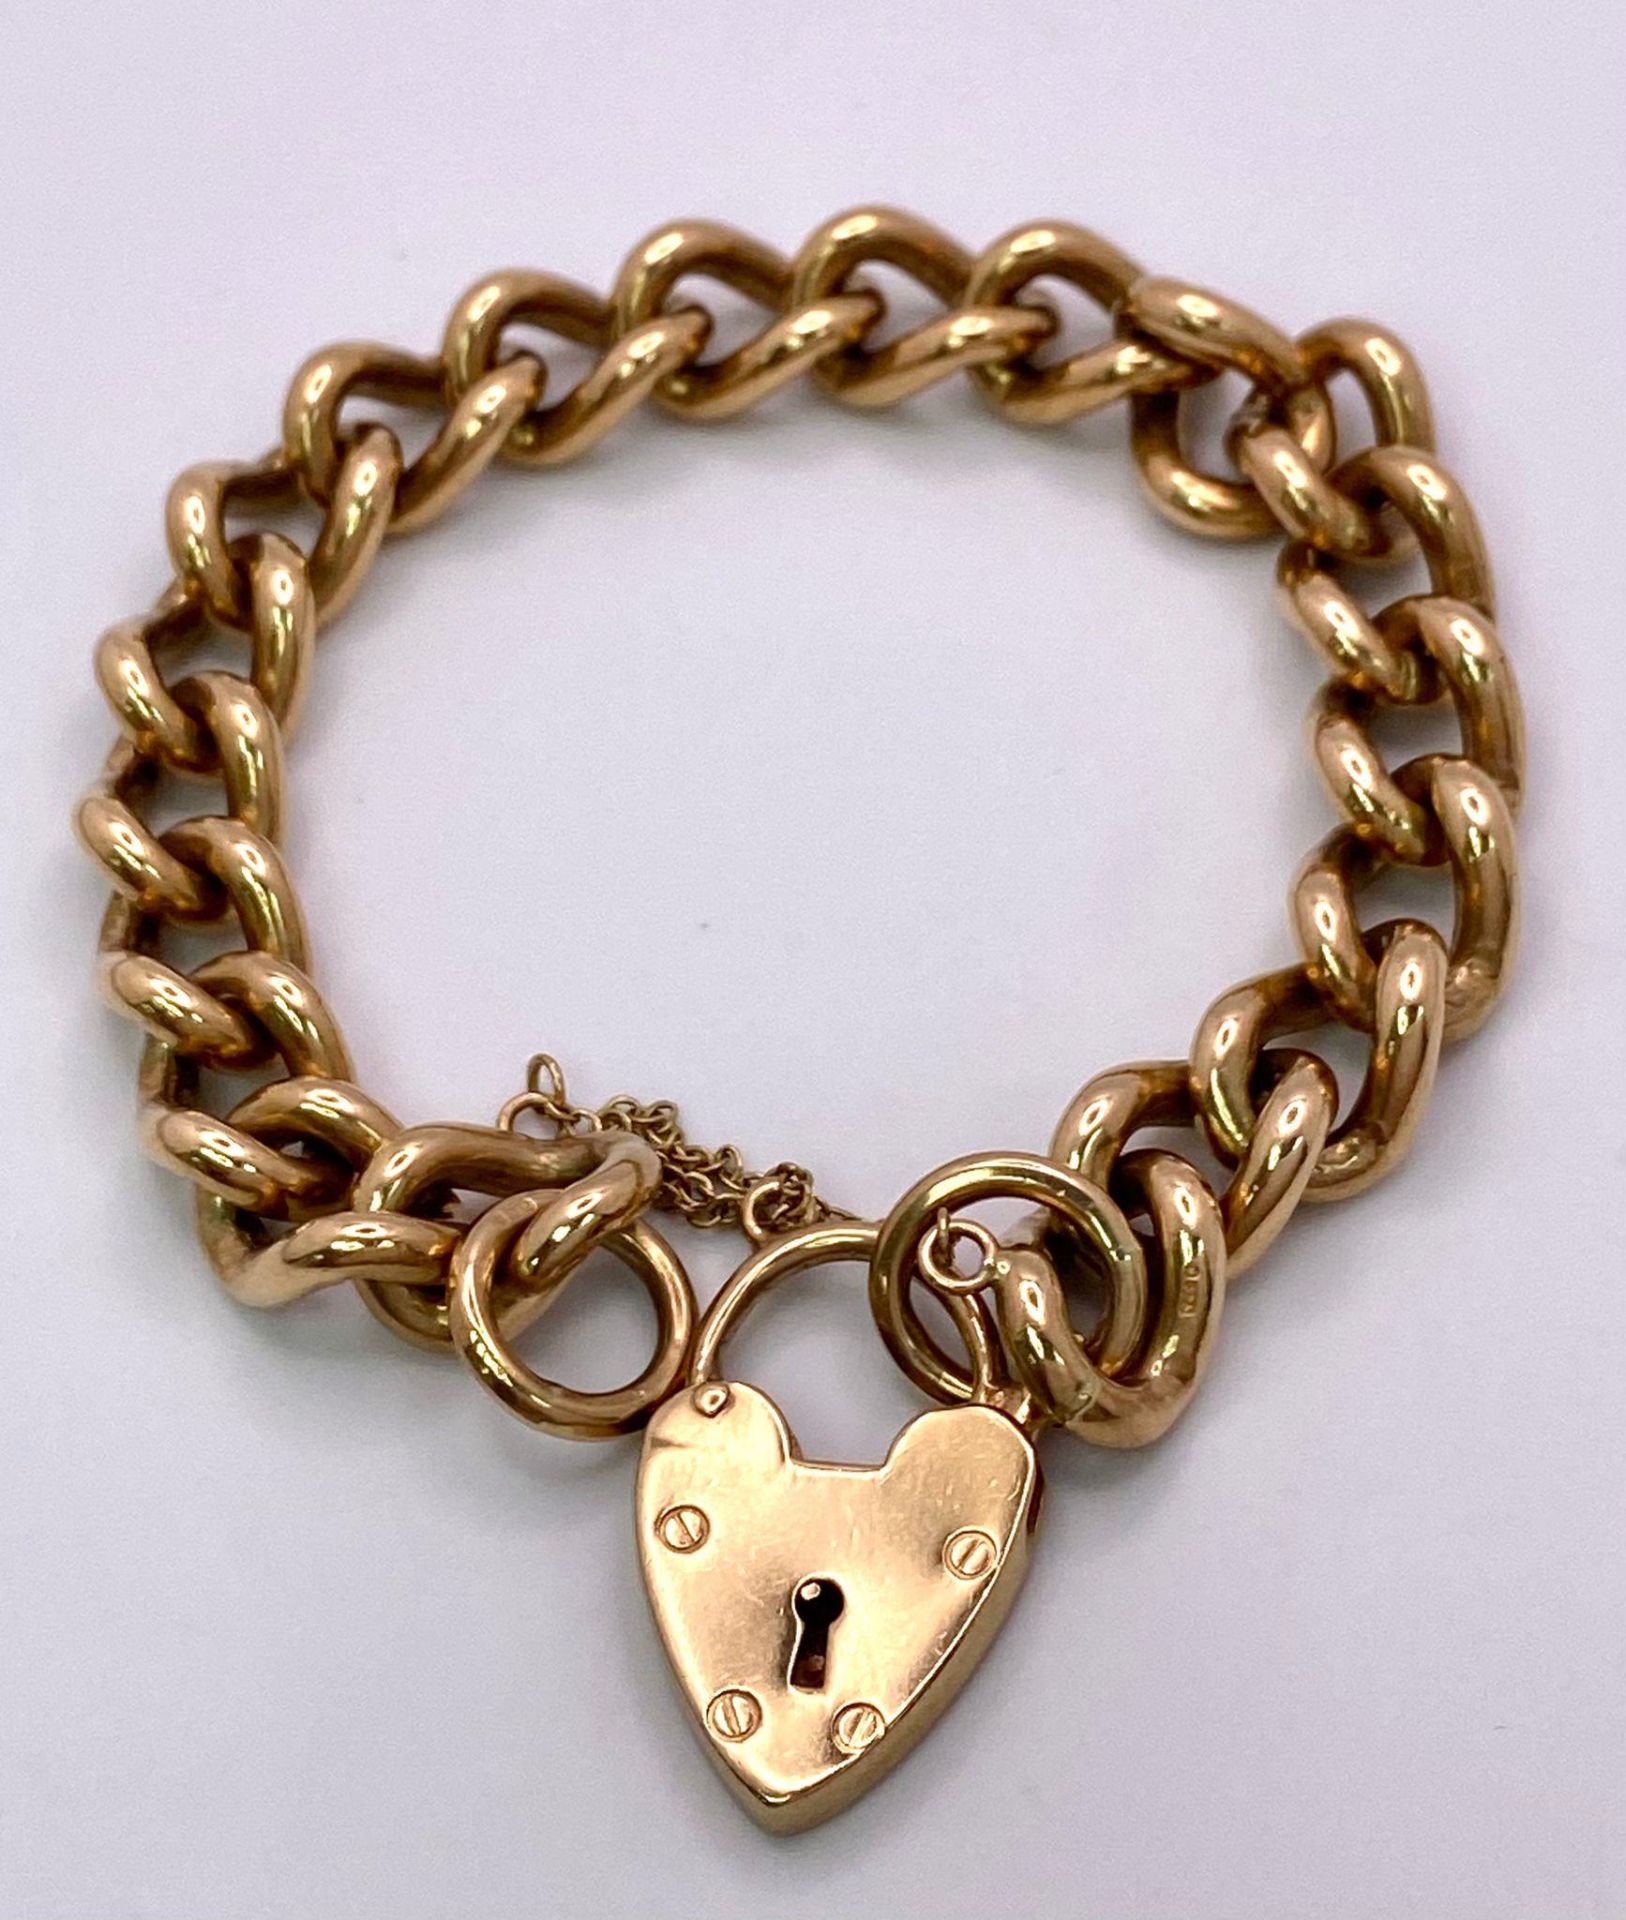 A Vintage 9K Yellow Gold Chunky Curb Link Bracelet with a Heart Clasp. 58g total weight. 17cm.